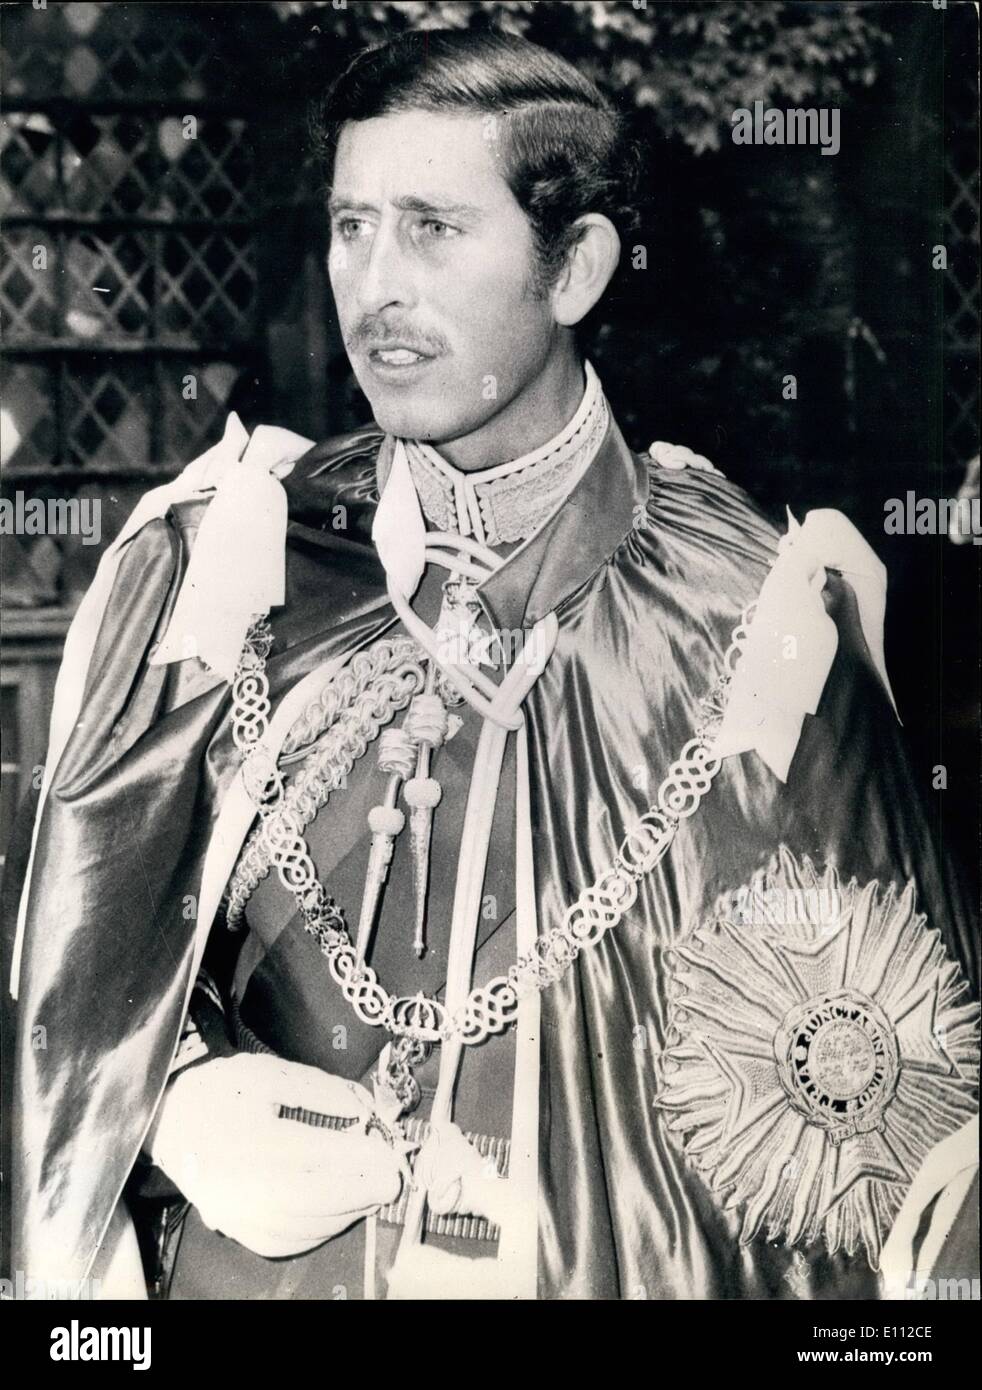 May 05, 1975 - The Prince of Wales is Installed as Great Master of the Most Honourable Order of the Bath by the Queen. H.M. The Stock Photo